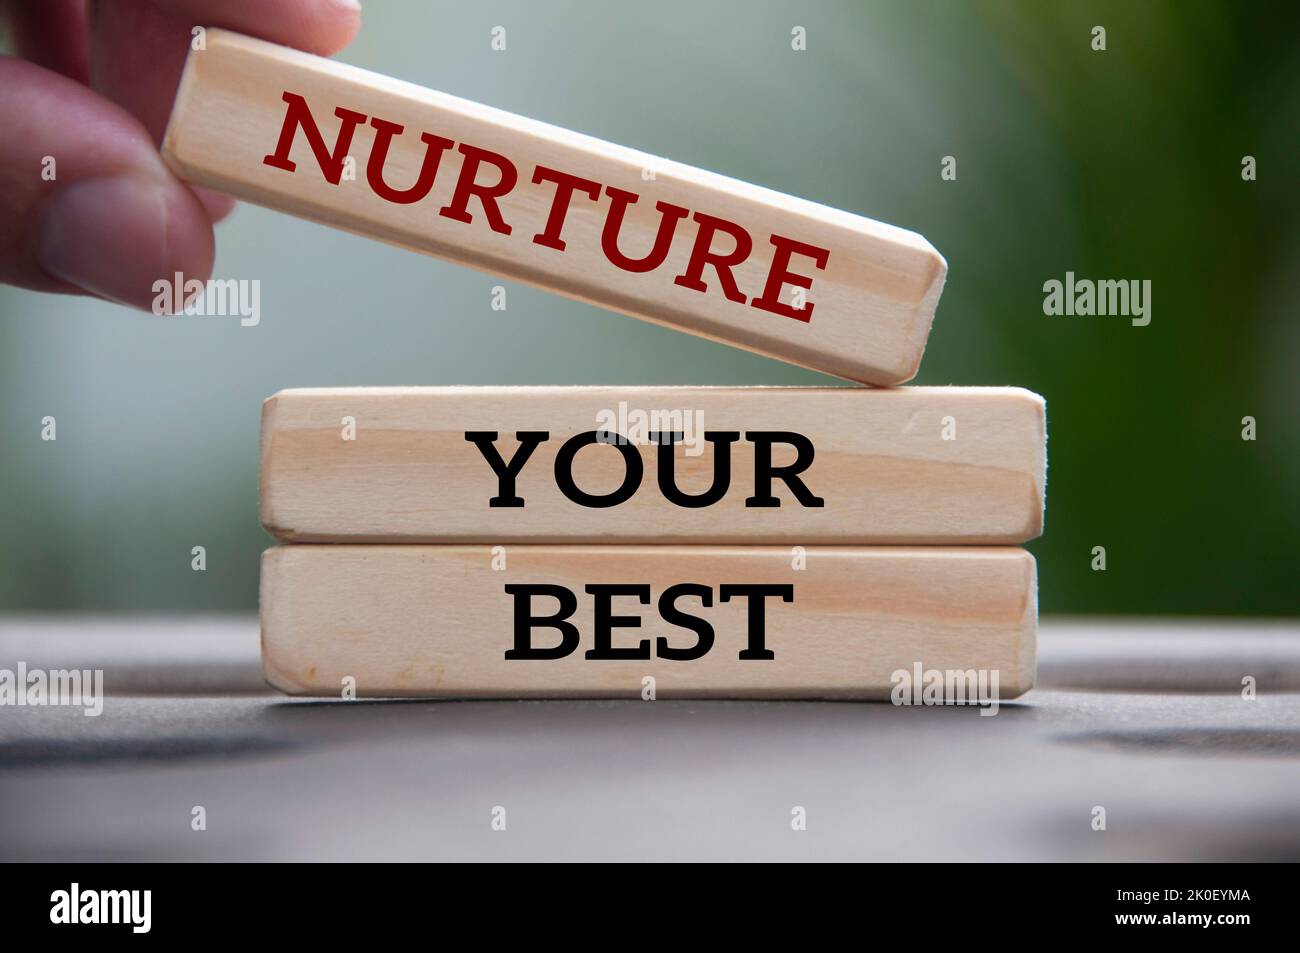 Hand holding wooden block with text - Nurture your best. Motivational concept. Stock Photo